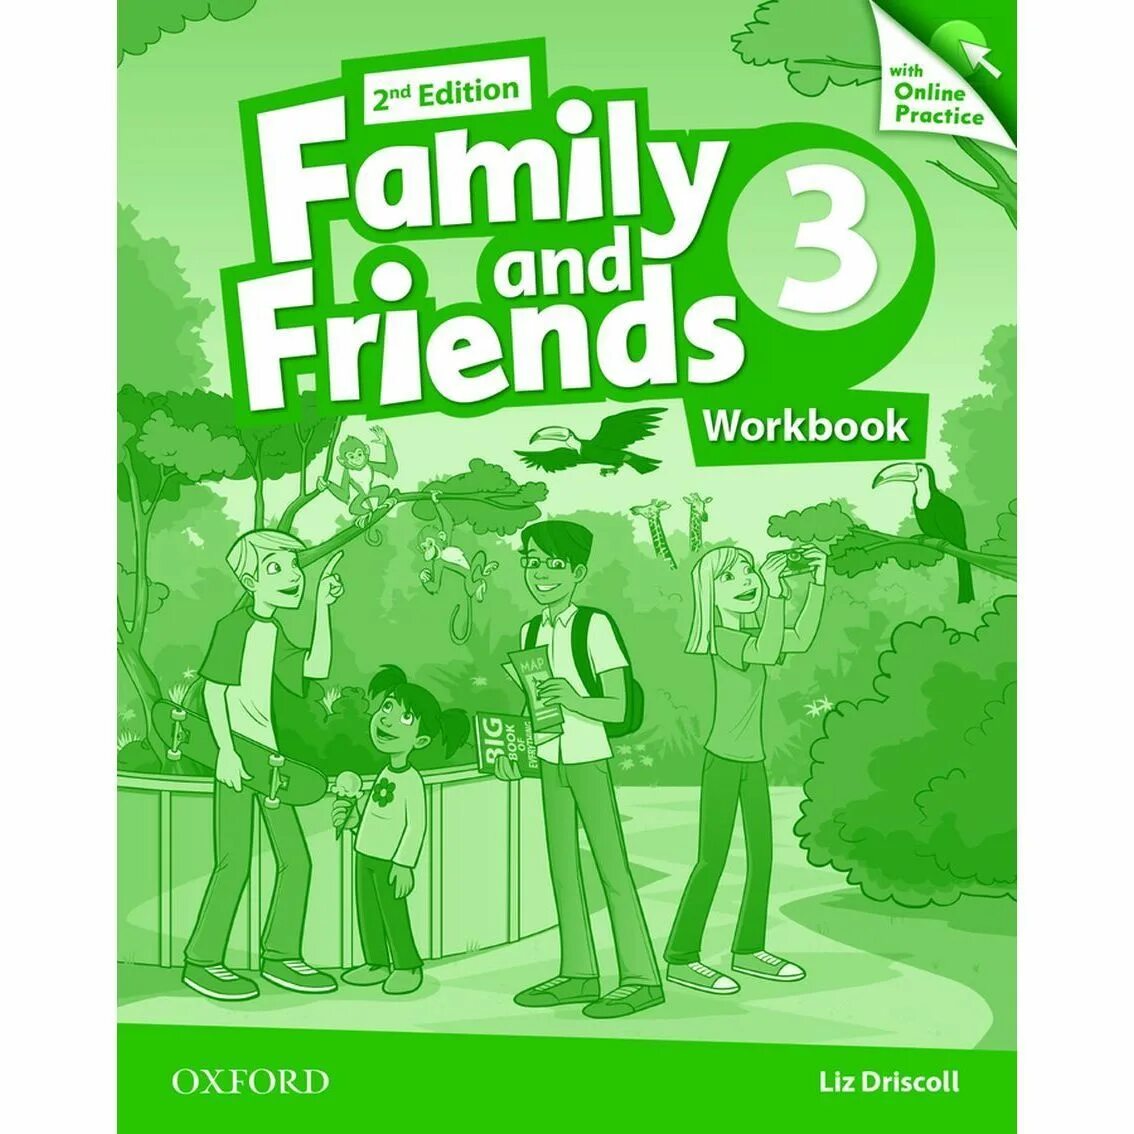 Family and friends 4 2nd edition workbook. 2nd Edition Family friends Workbook Oxford Naomi Simmons. 4 Класс Family and friends 2 Classbook Workbook. Family and friends 4 2 Edition. Family and friends 4 Workbook.